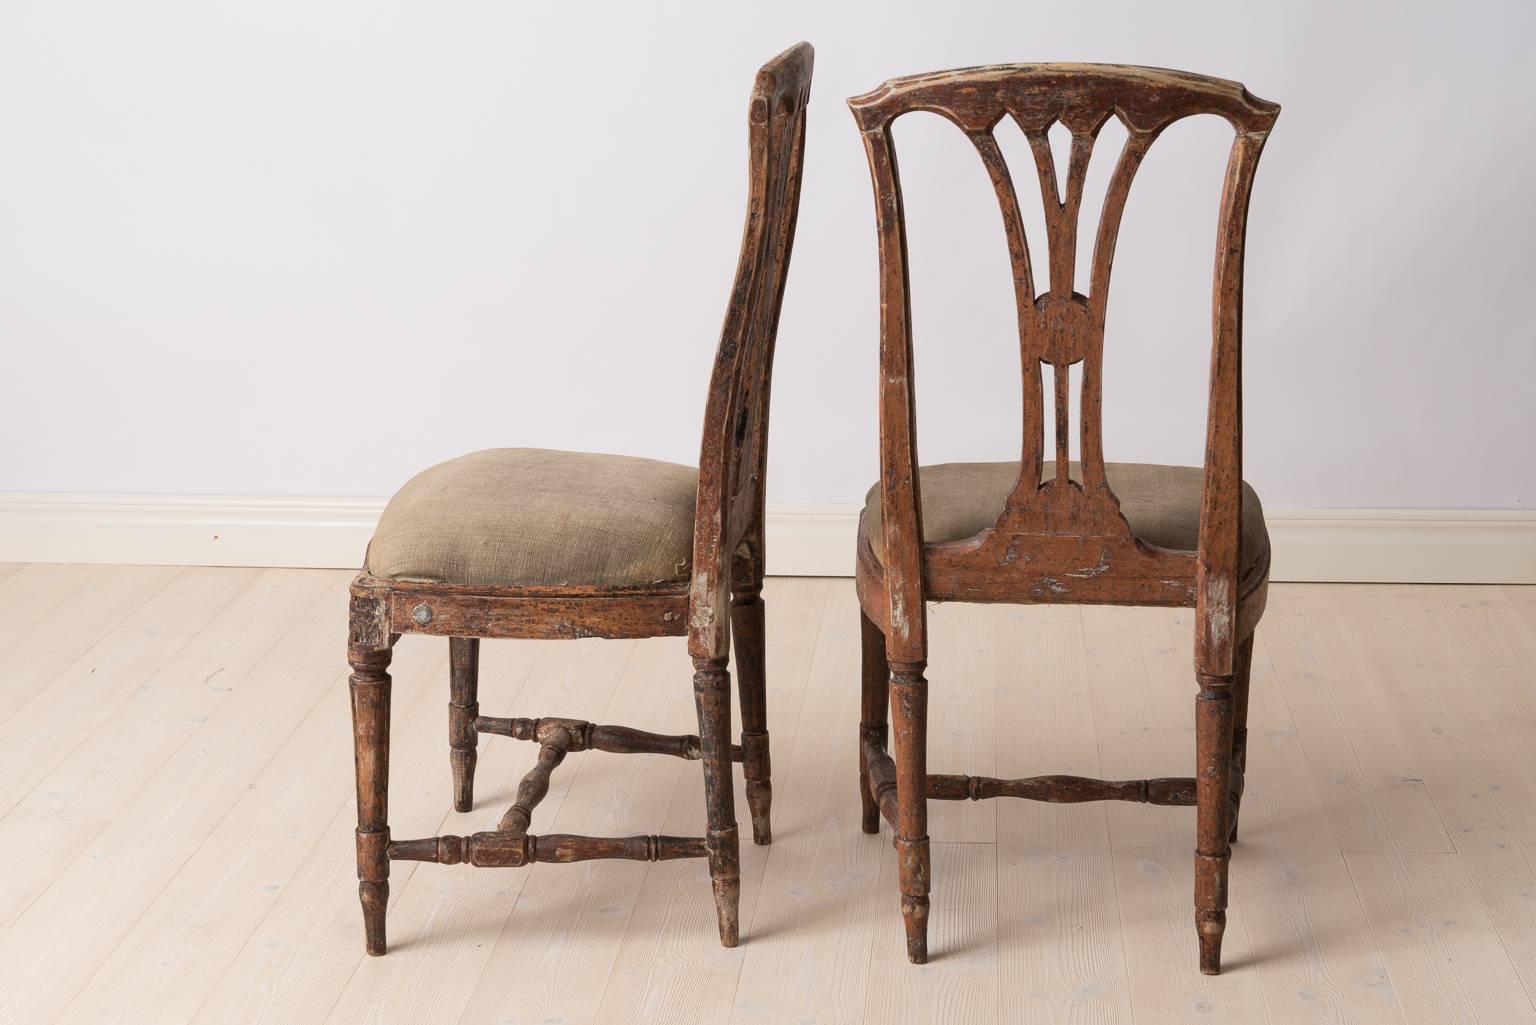 Hand-Crafted Pair of Late 1700s Swedish Gustavian Chairs